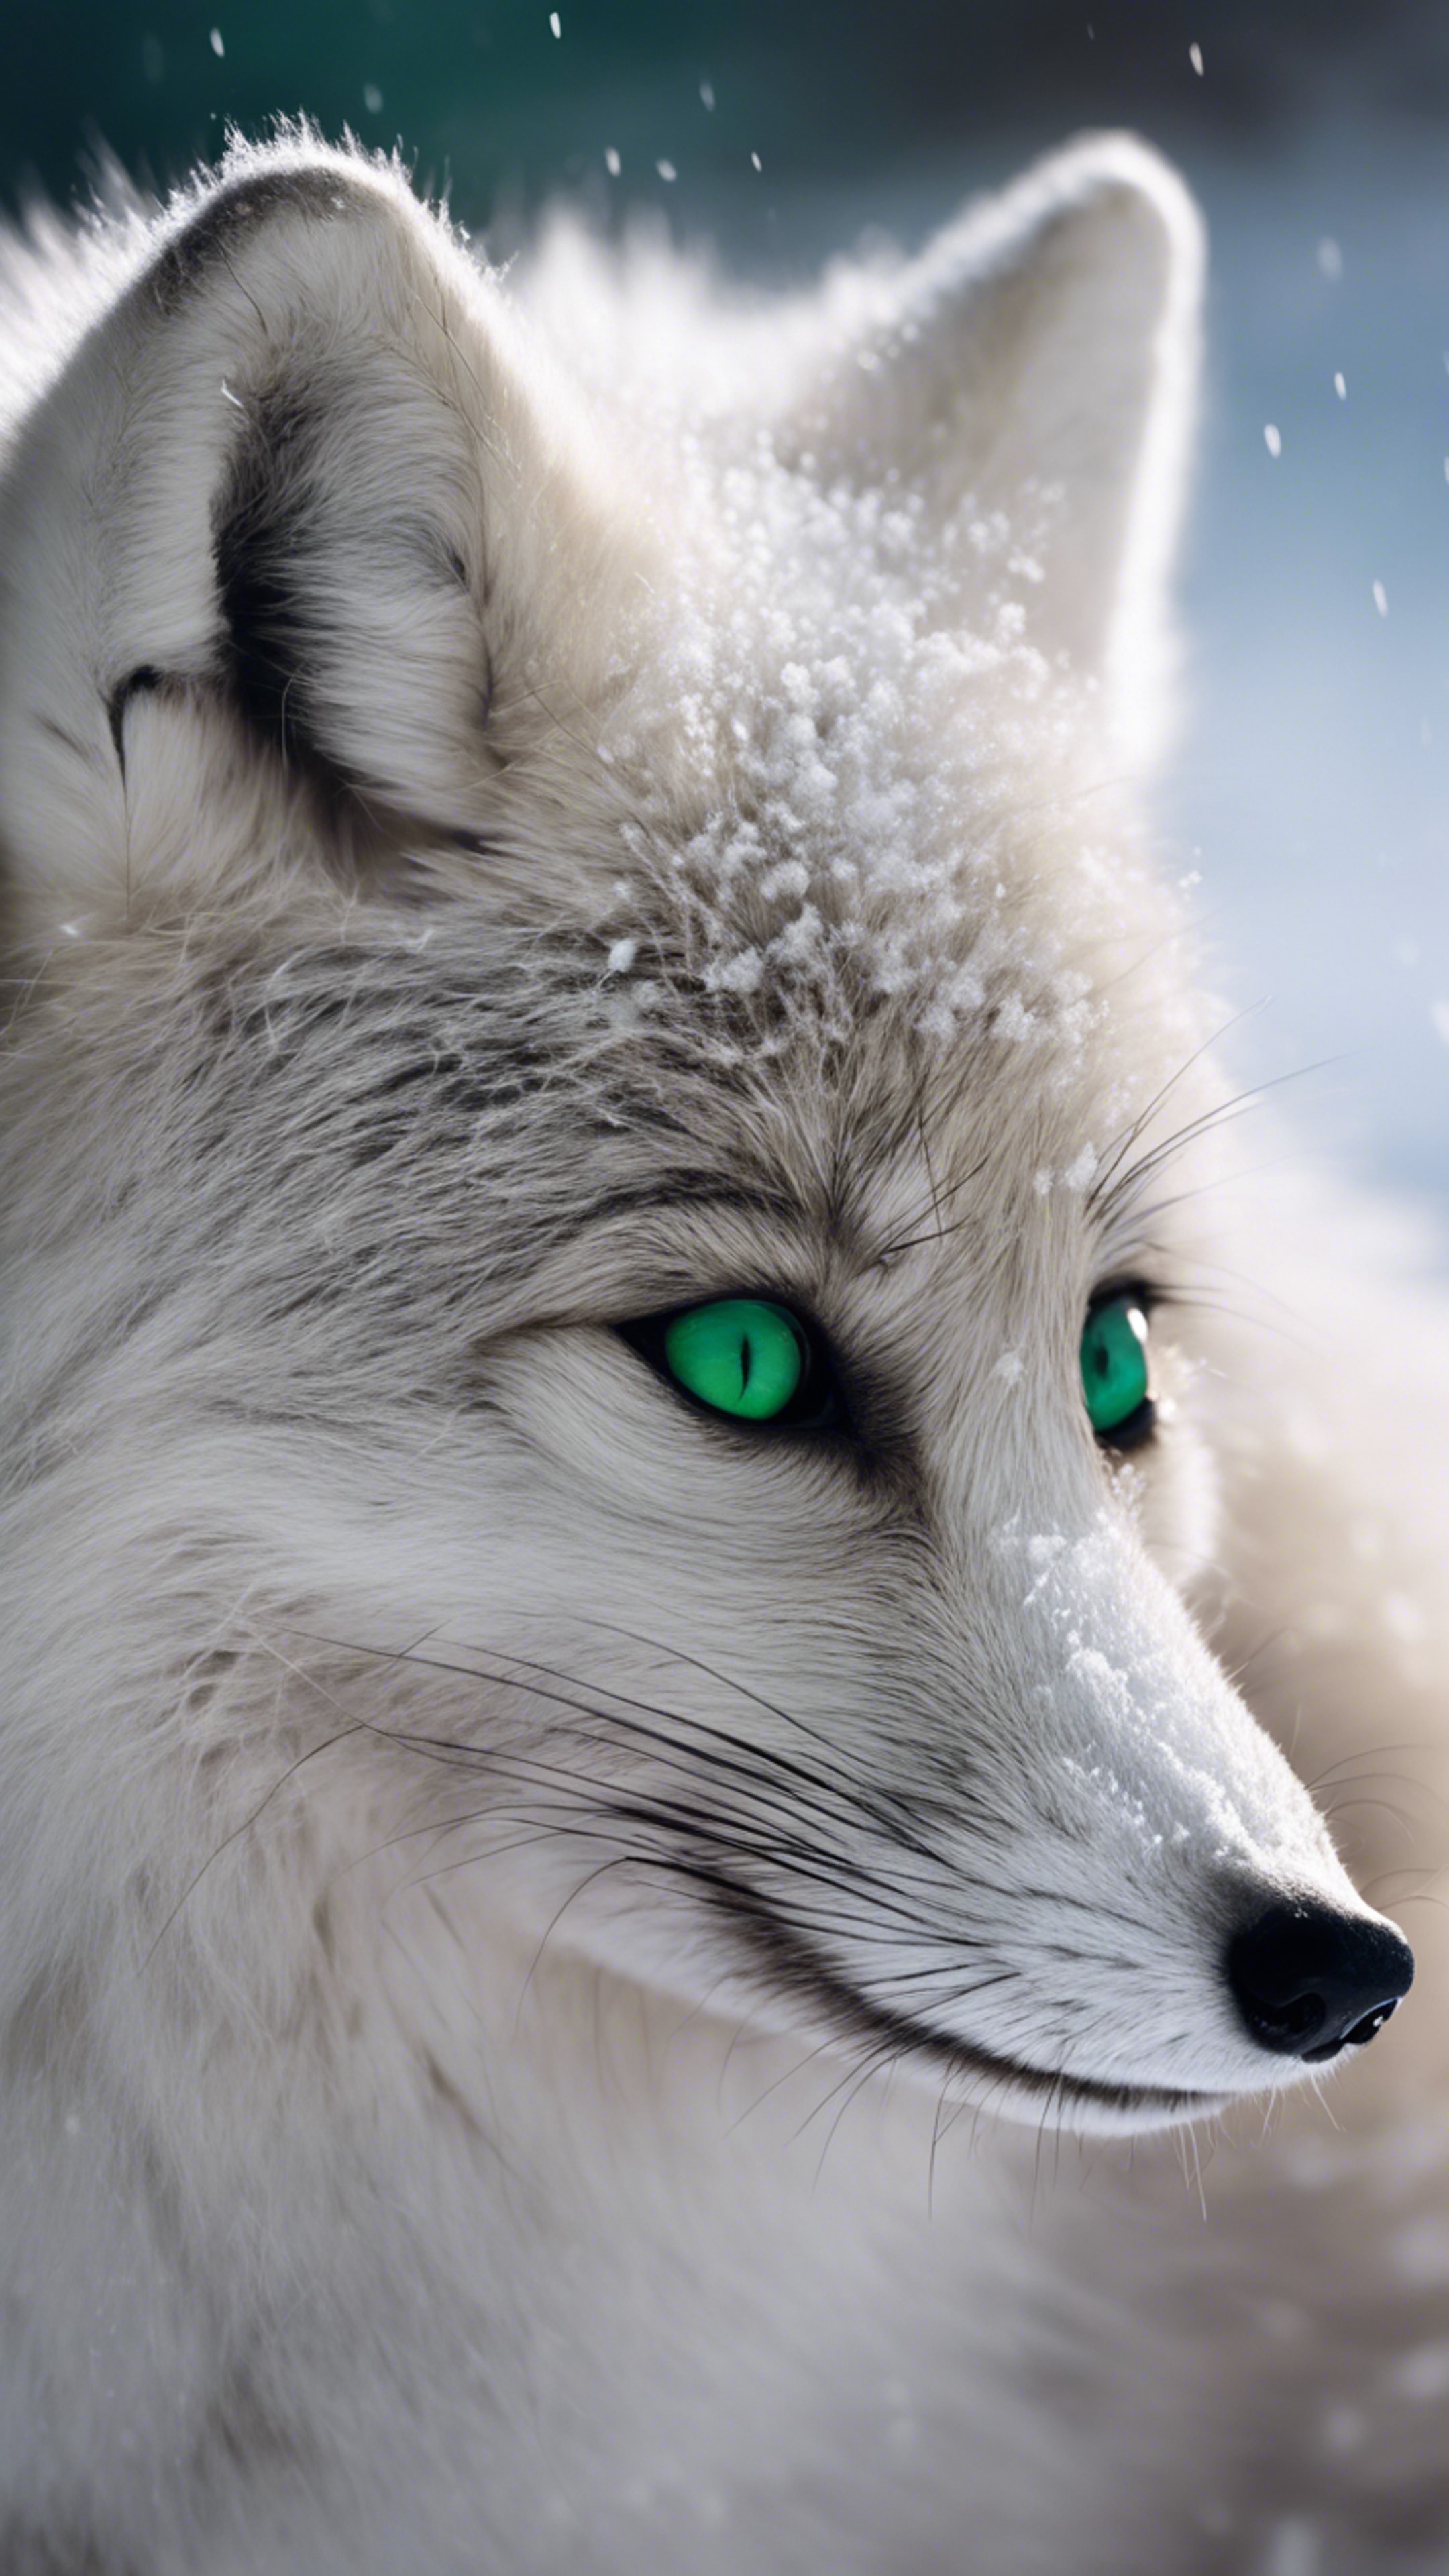 A fluffy, smoky gray arctic fox curled up in a snowy setting, its vivid green eyes staring directly at the viewer. טפט[a0ededdcc5bf4726bdb5]